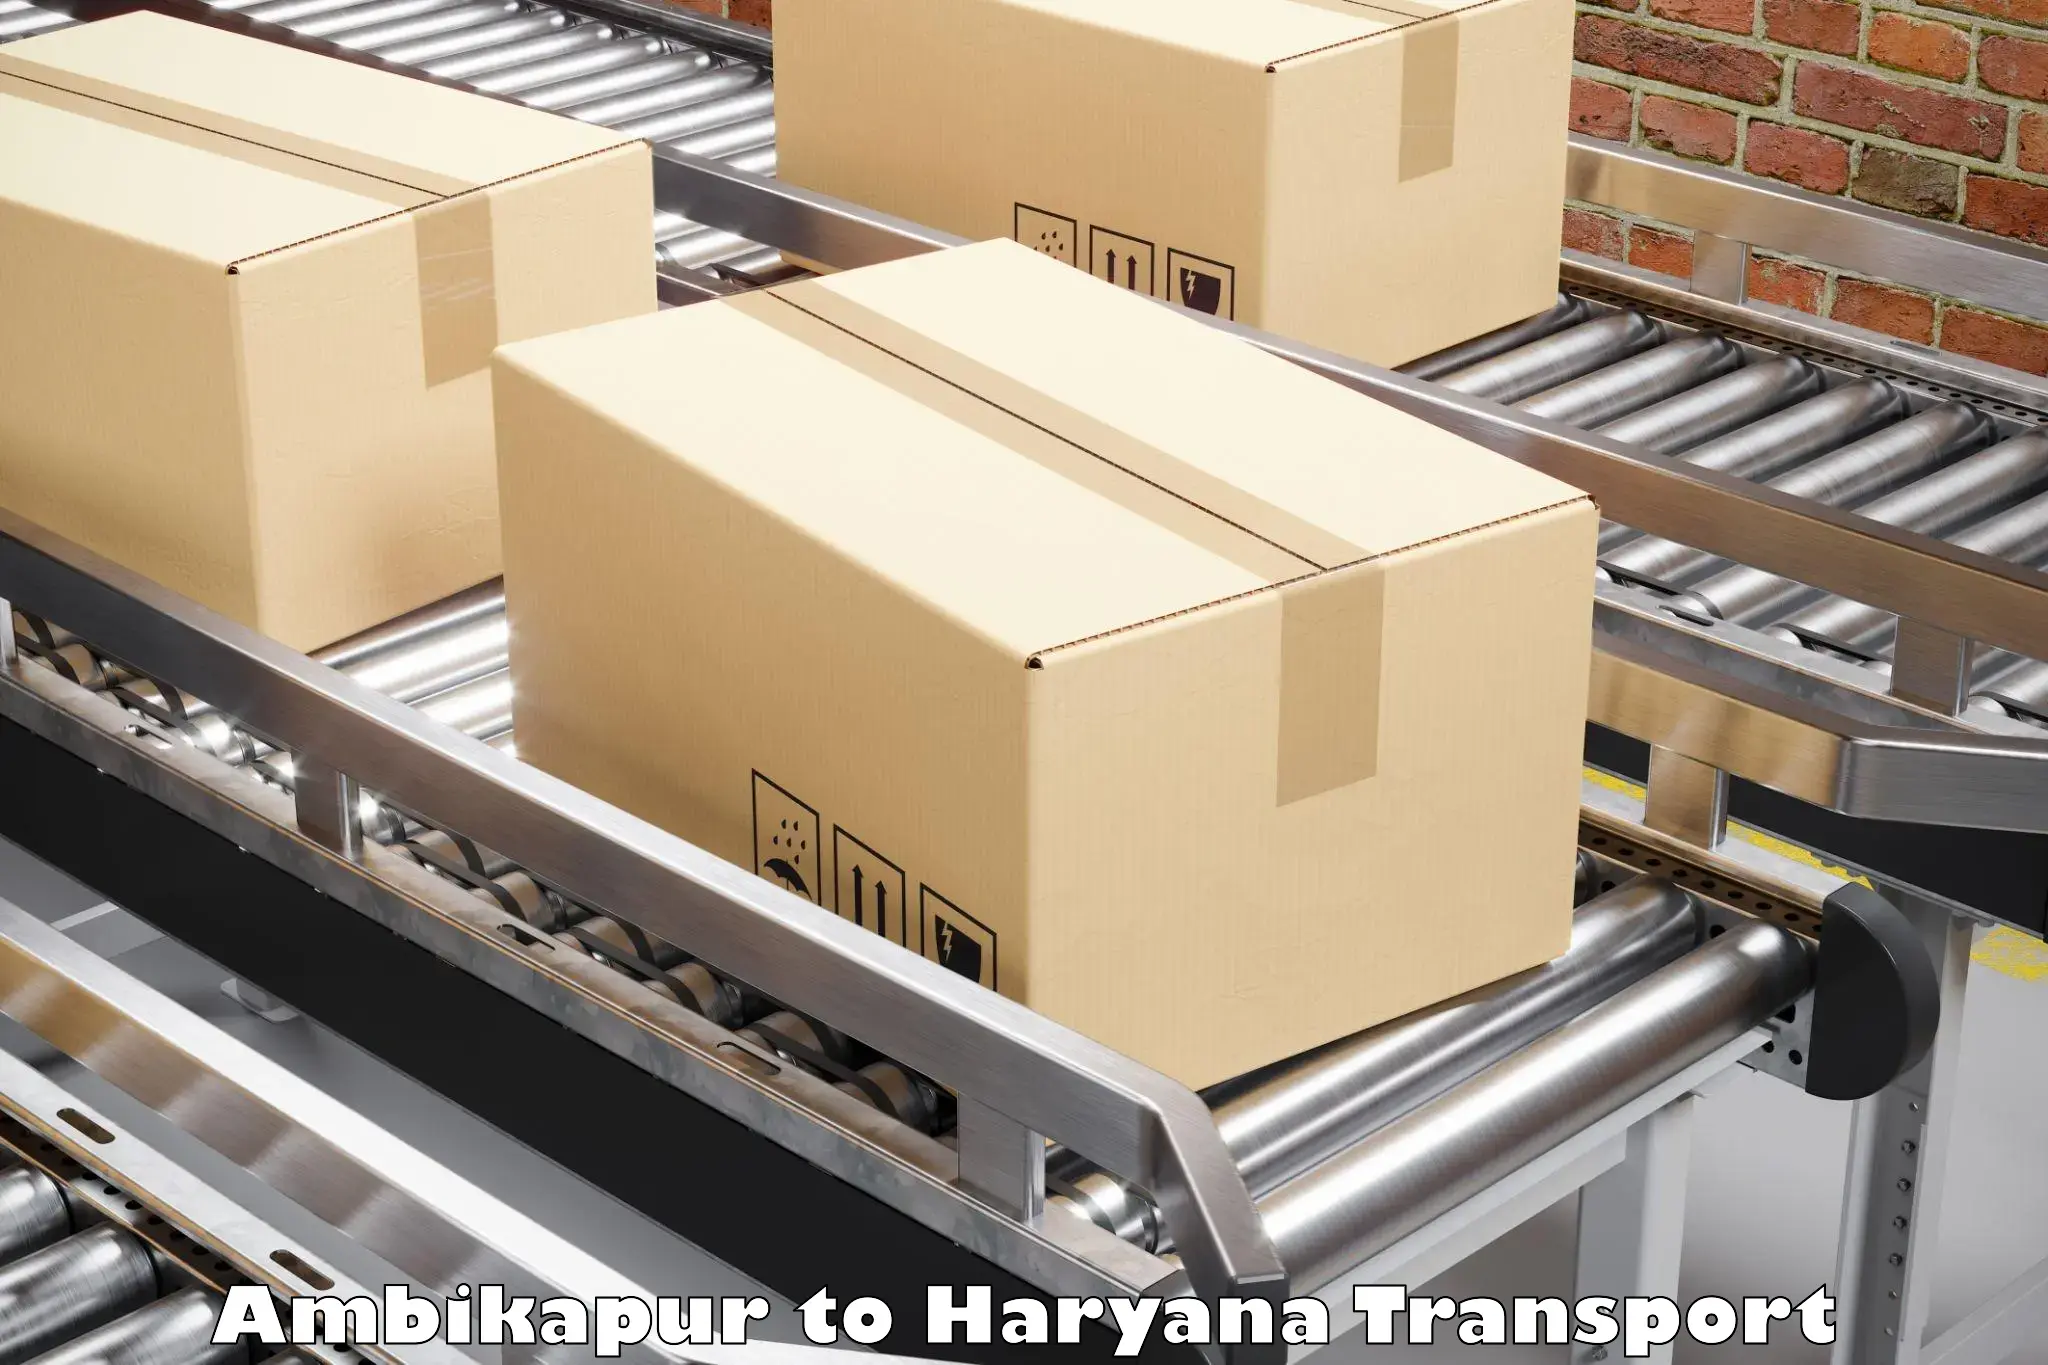 Luggage transport services Ambikapur to Chaudhary Charan Singh Haryana Agricultural University Hisar